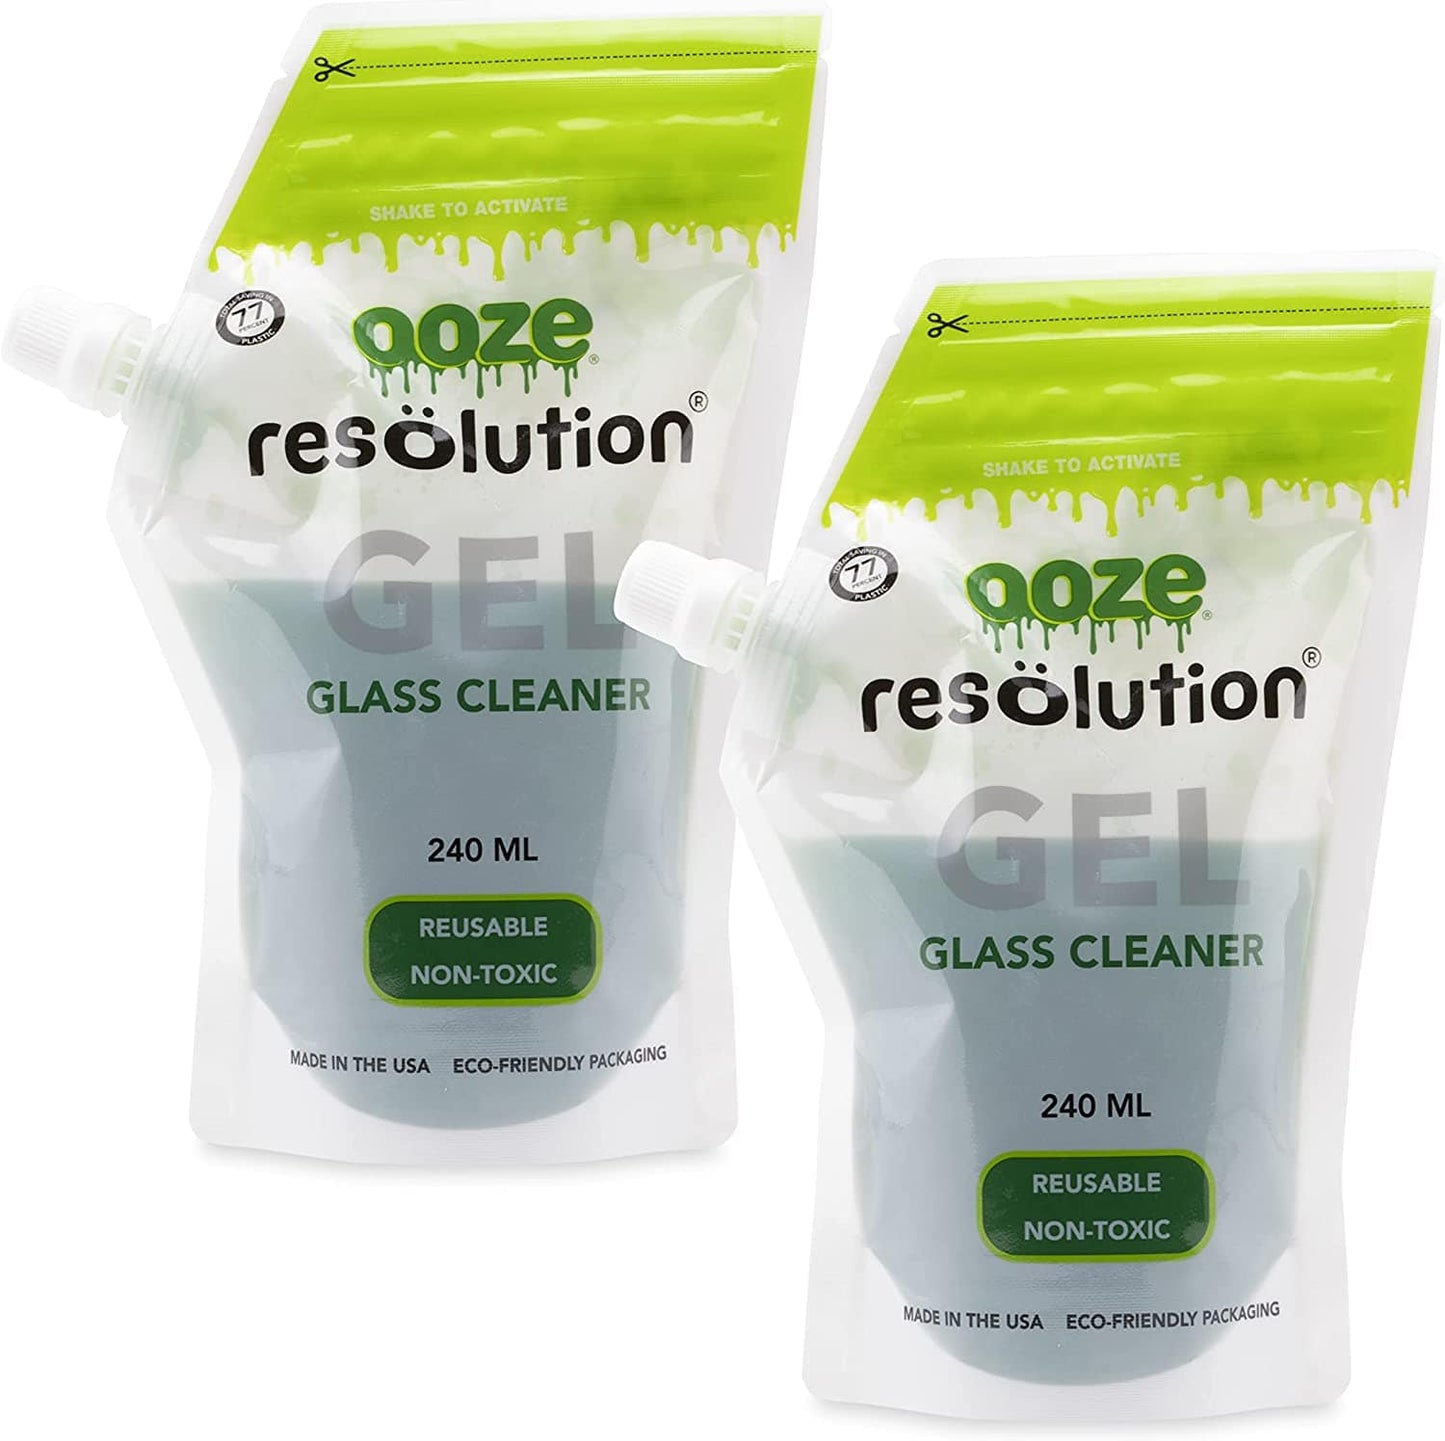 Ooze Resolution Cleaning Products Ooze Resolution Gel Glass Cleaner - 2 Pack 240ml Each